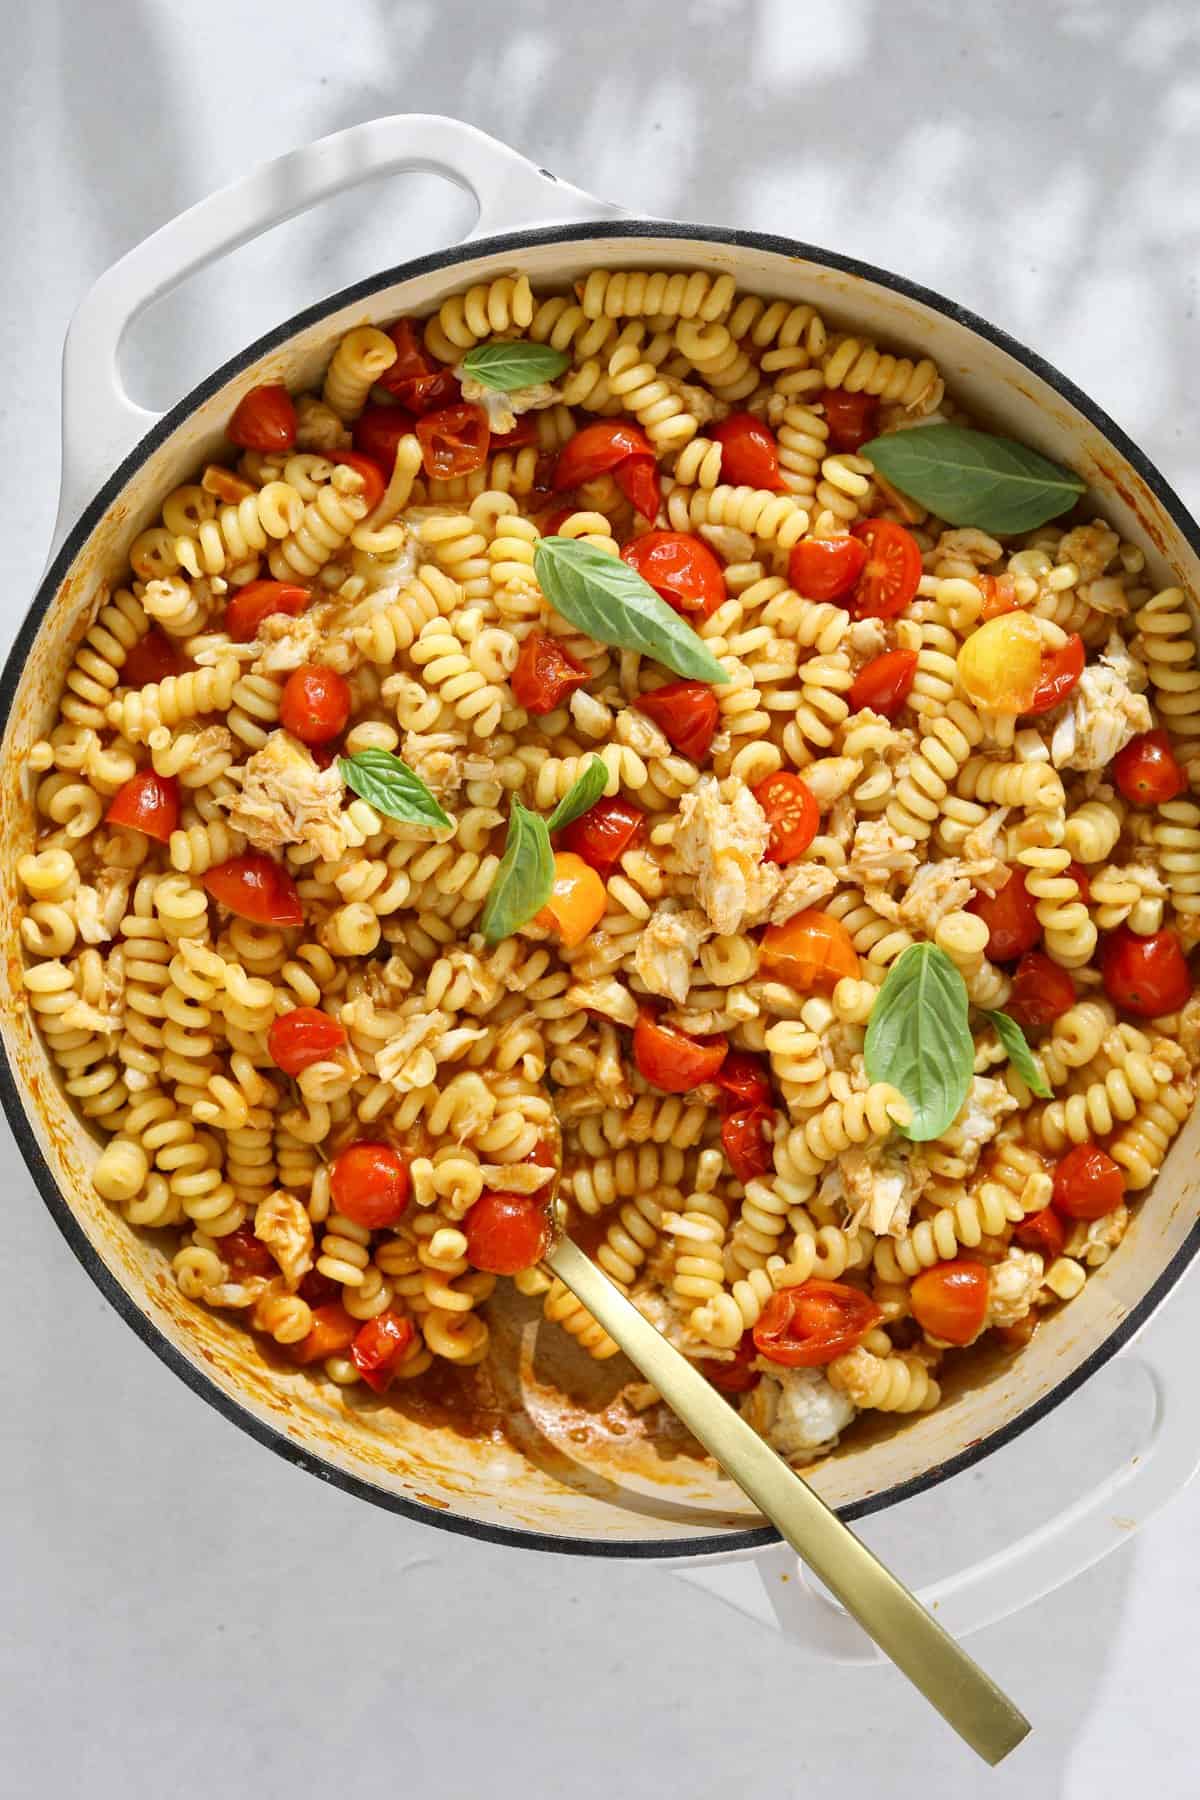 An enamel dutch oven pan filled with pasta with crab, tomatoes and fresh basil leaves with a gold spoon.